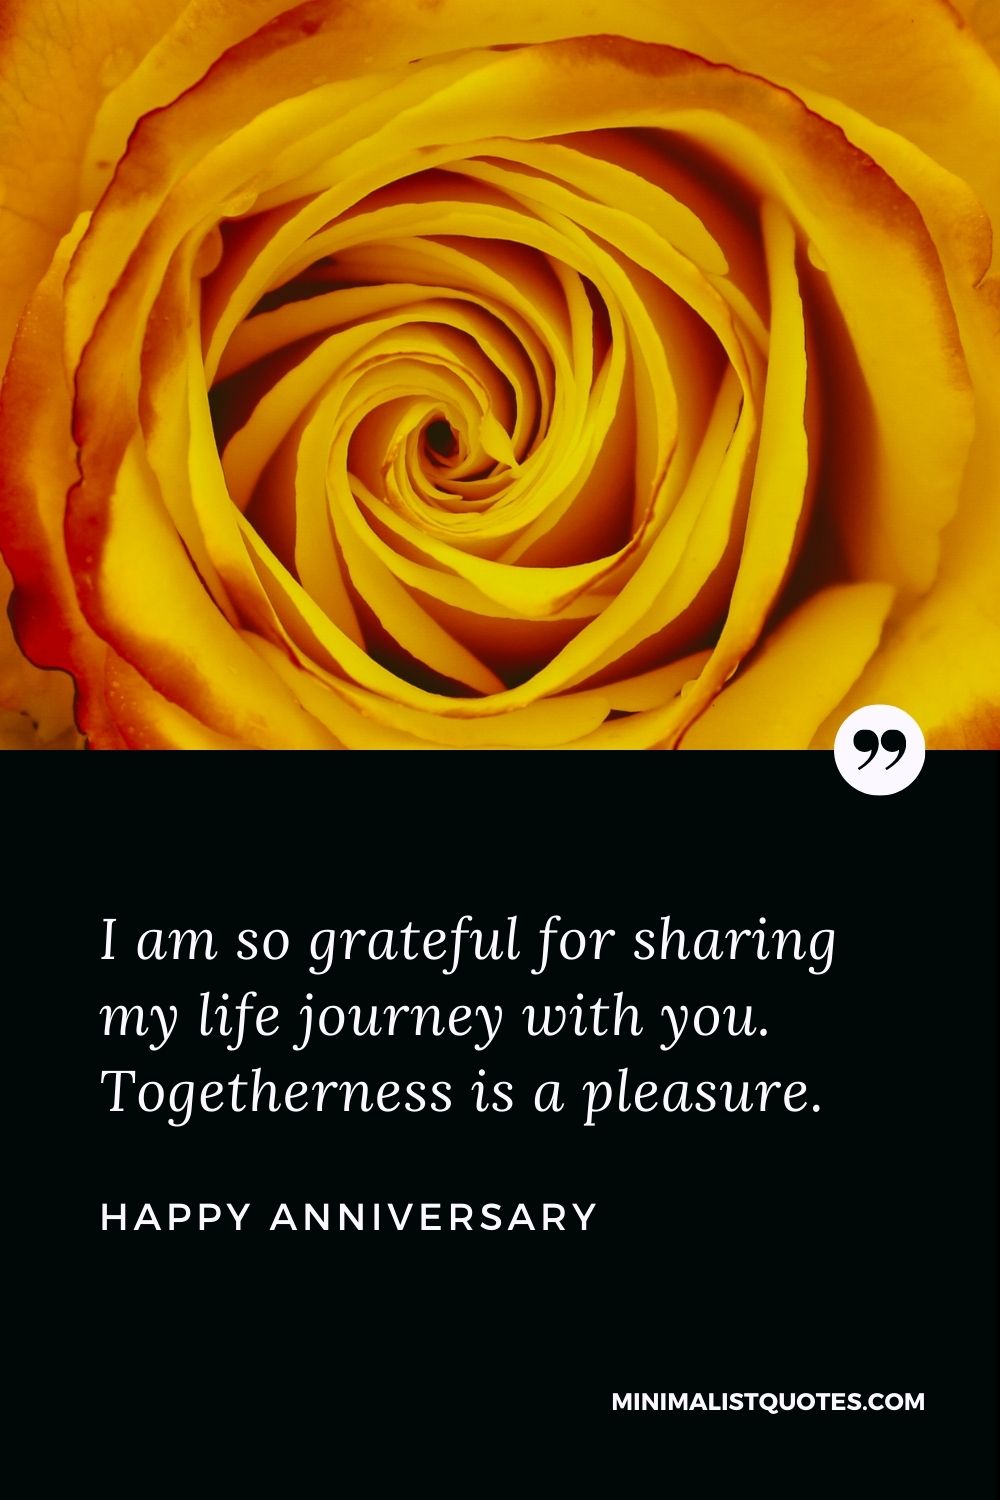 Happy Anniversary Wishes - I am so grateful for sharing my life journey with you. Togetherness is a pleasure.